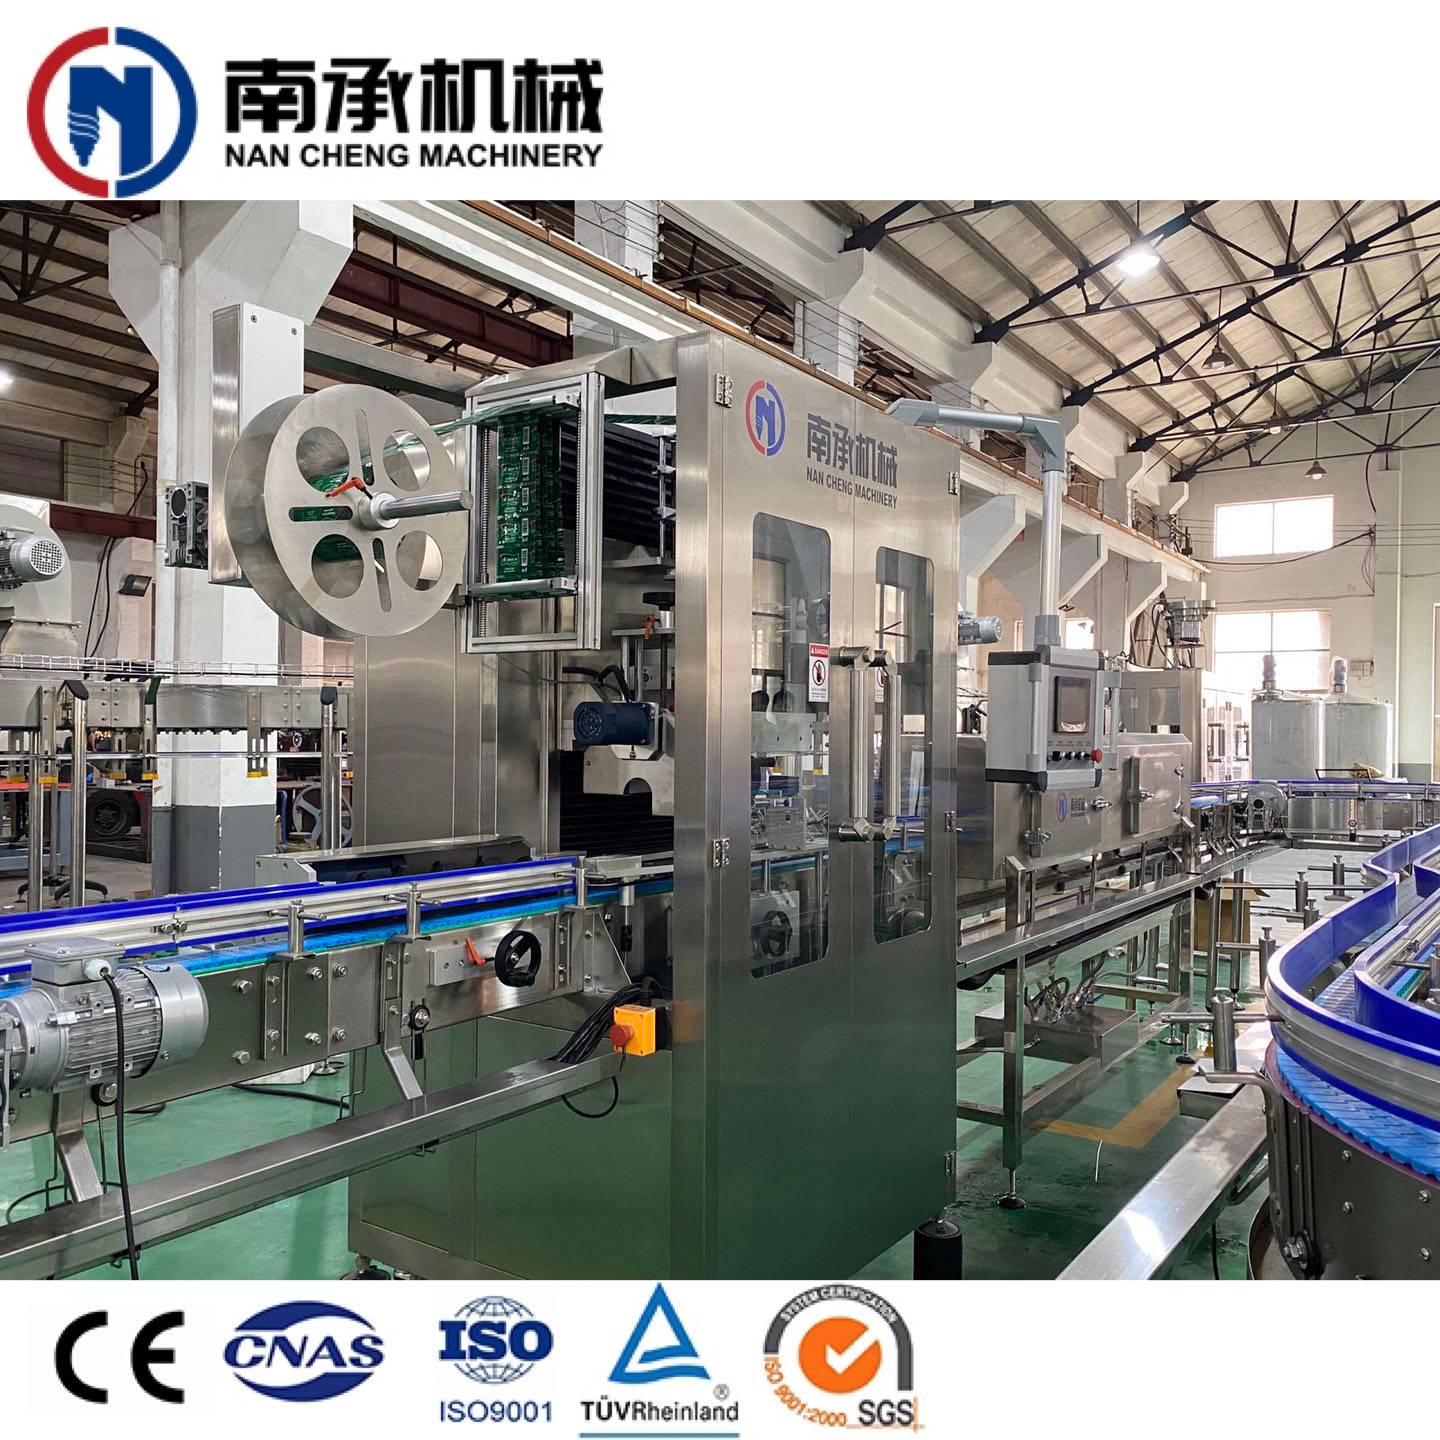 NC-series Automatic Sleeve Labeling Machine 